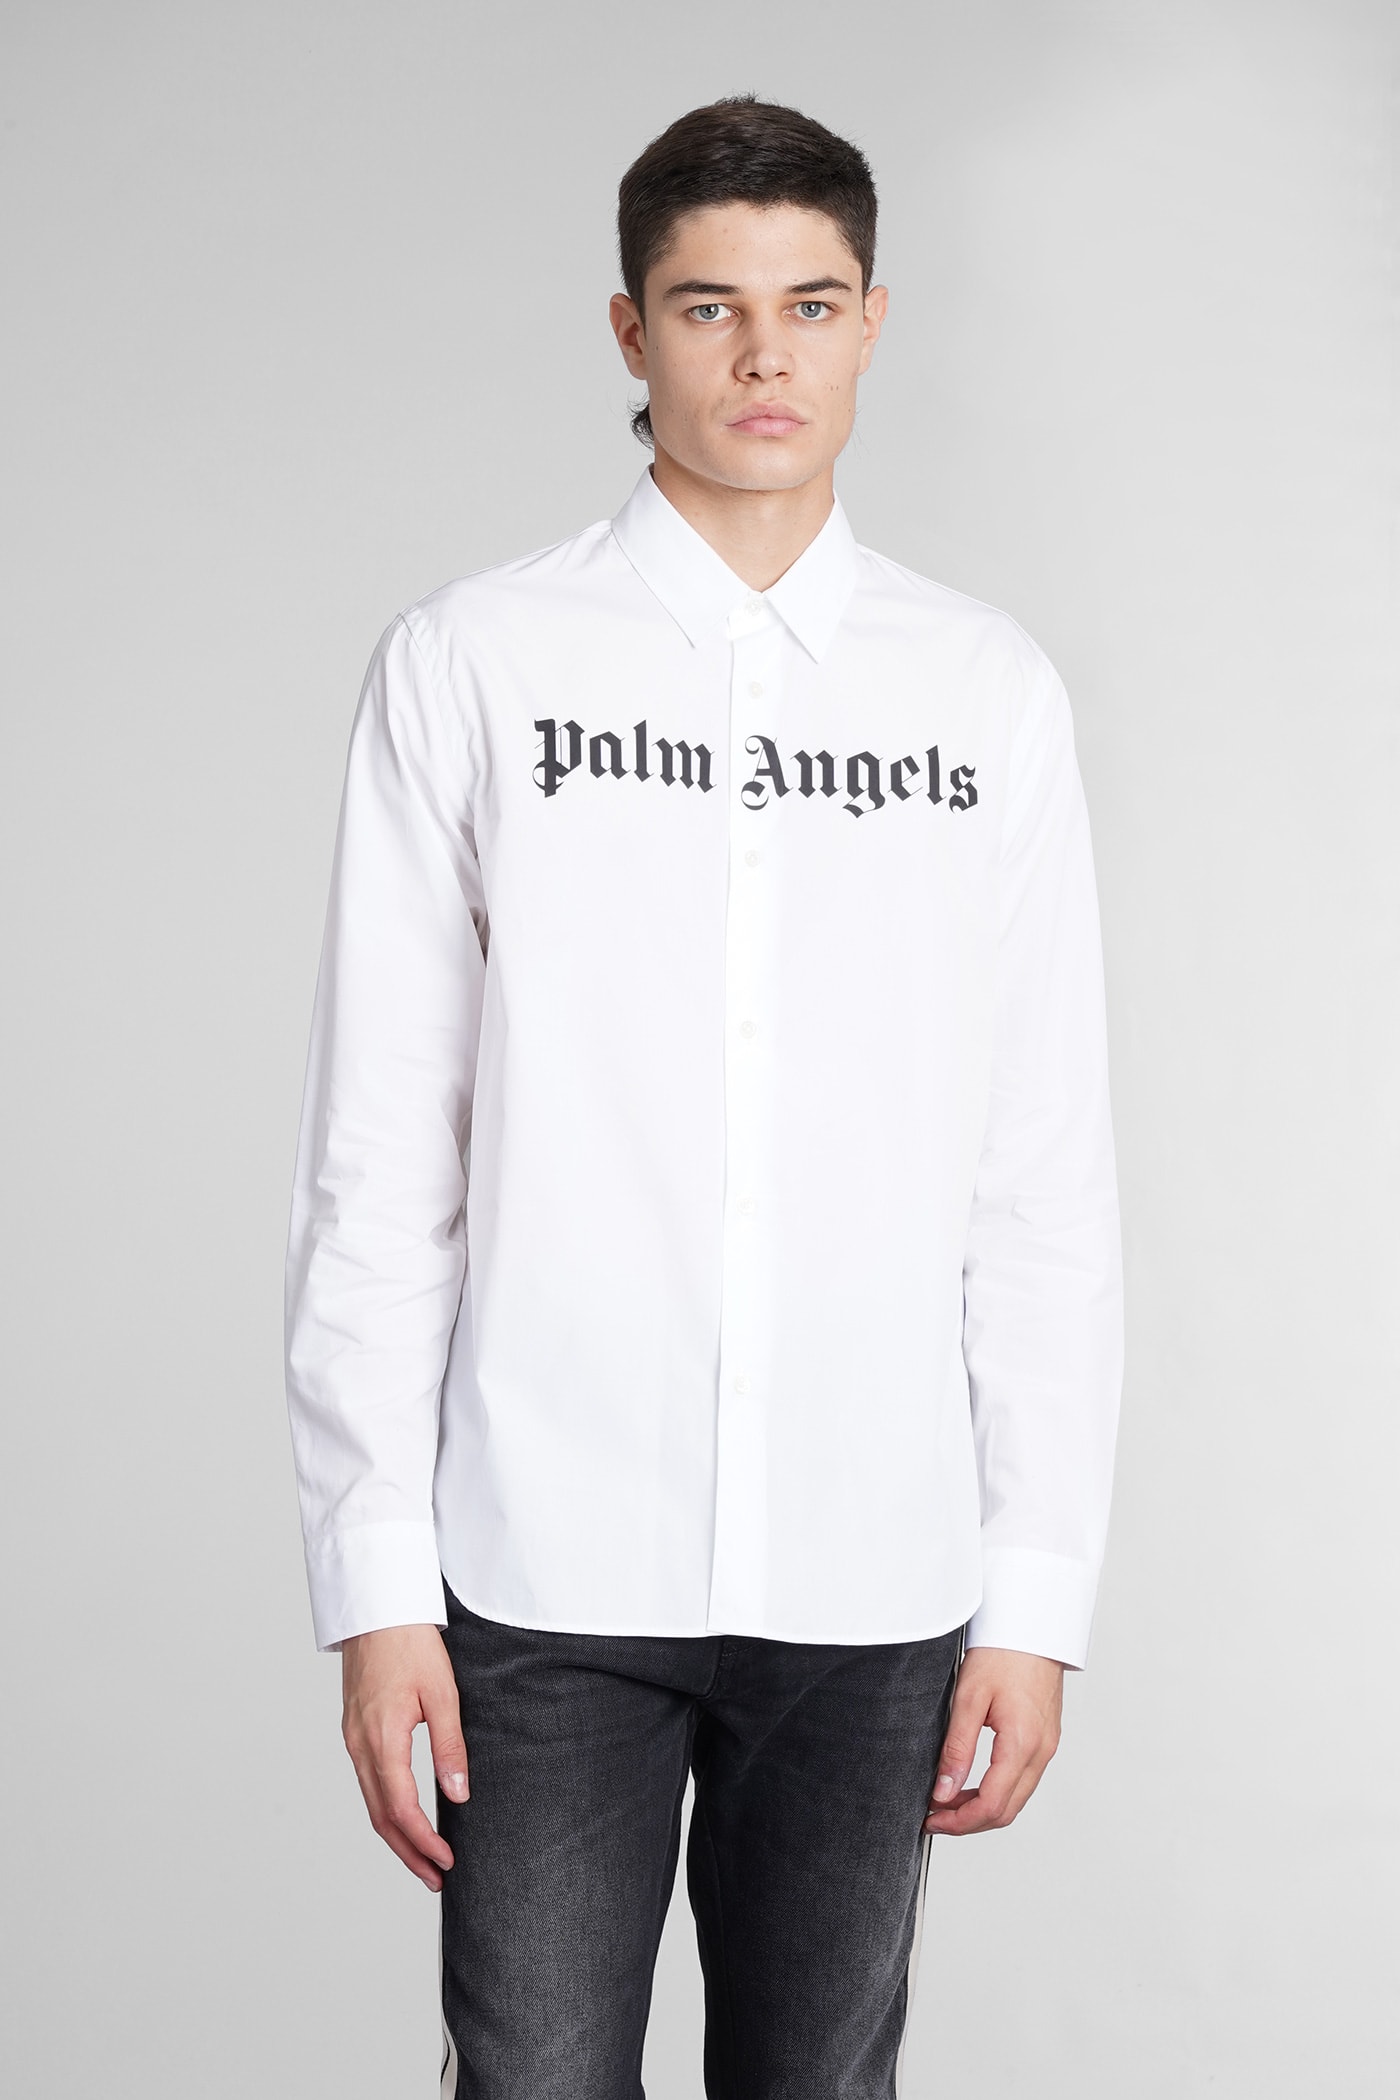 Palm Angels Shirt In White Cotton